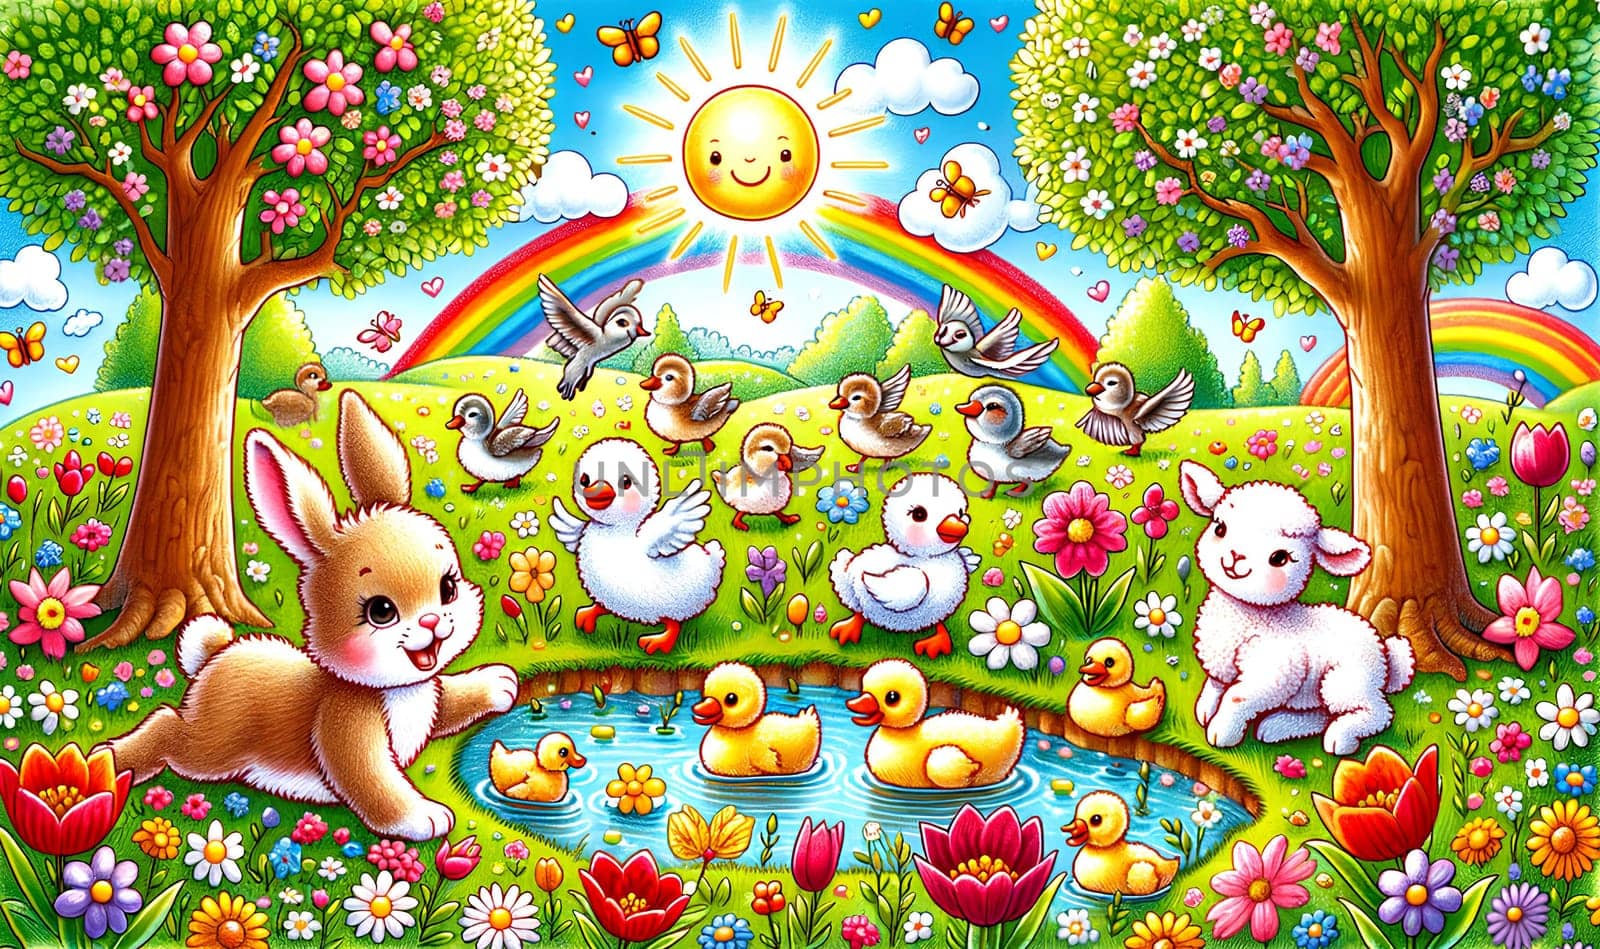 children's spring drawing. Ducklings are swimming in the pond, a lamb and other birds are grazing in the meadow, trees are blooming, butterflies are flying, the sun is shining by Annado